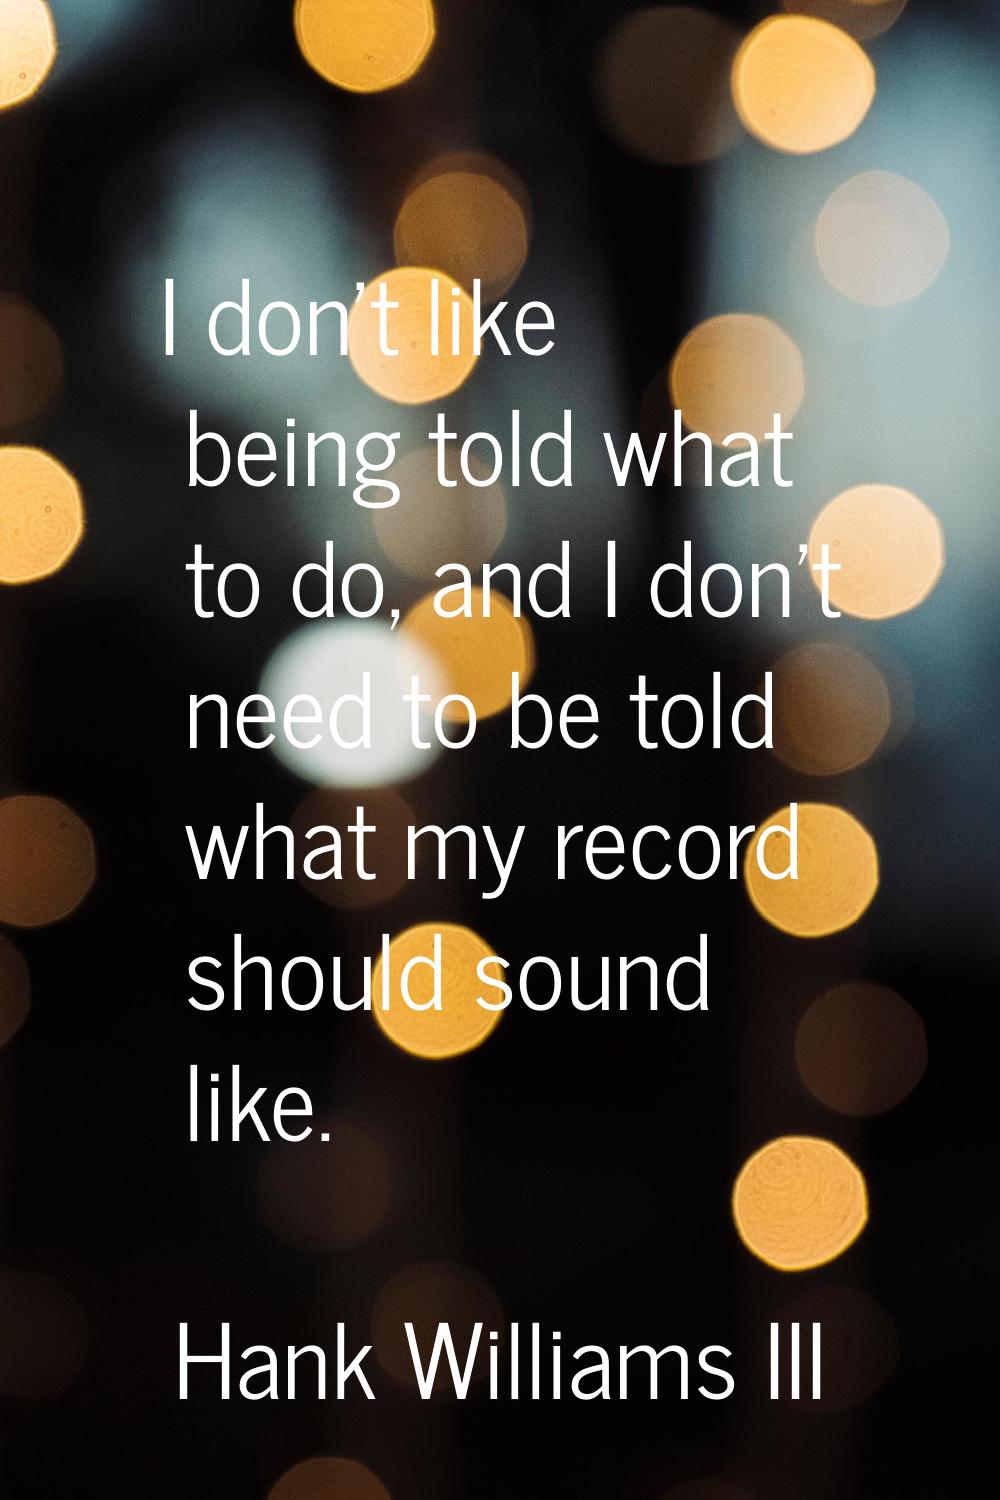 I don't like being told what to do, and I don't need to be told what my record should sound like.